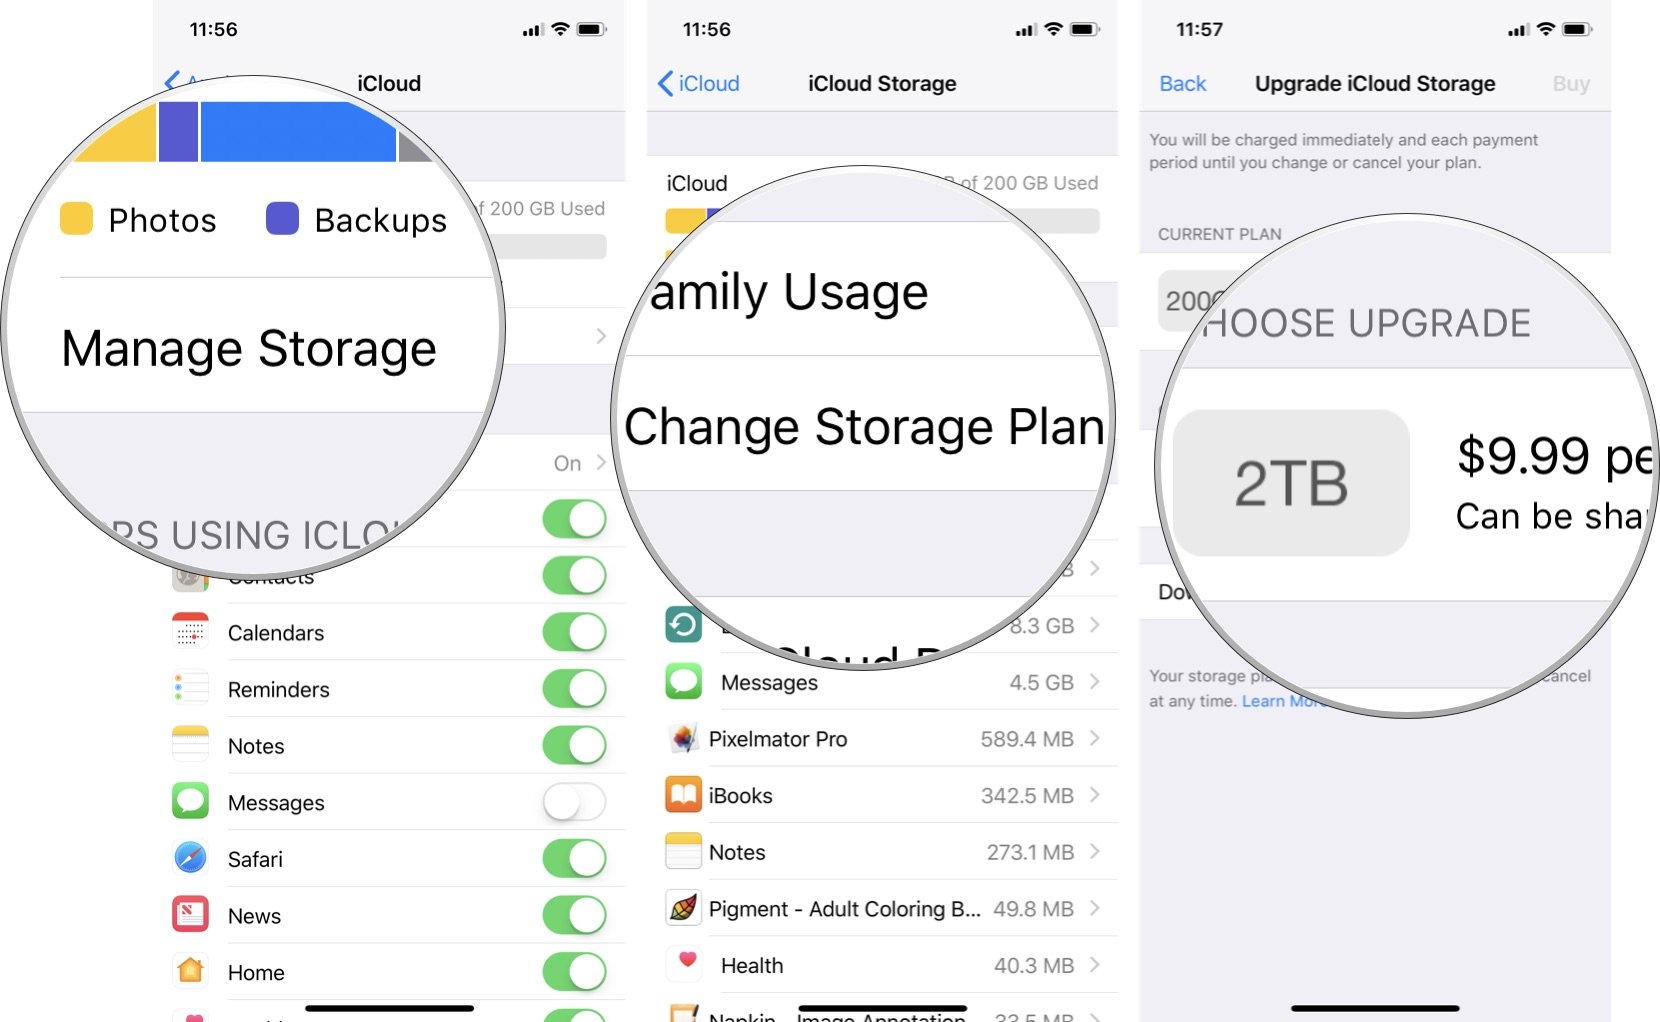 How to buy more iCloud storage on iPhone and iPad by showing steps: Tap Manage Storage, tap Change Storage Plan, tap on an available plan